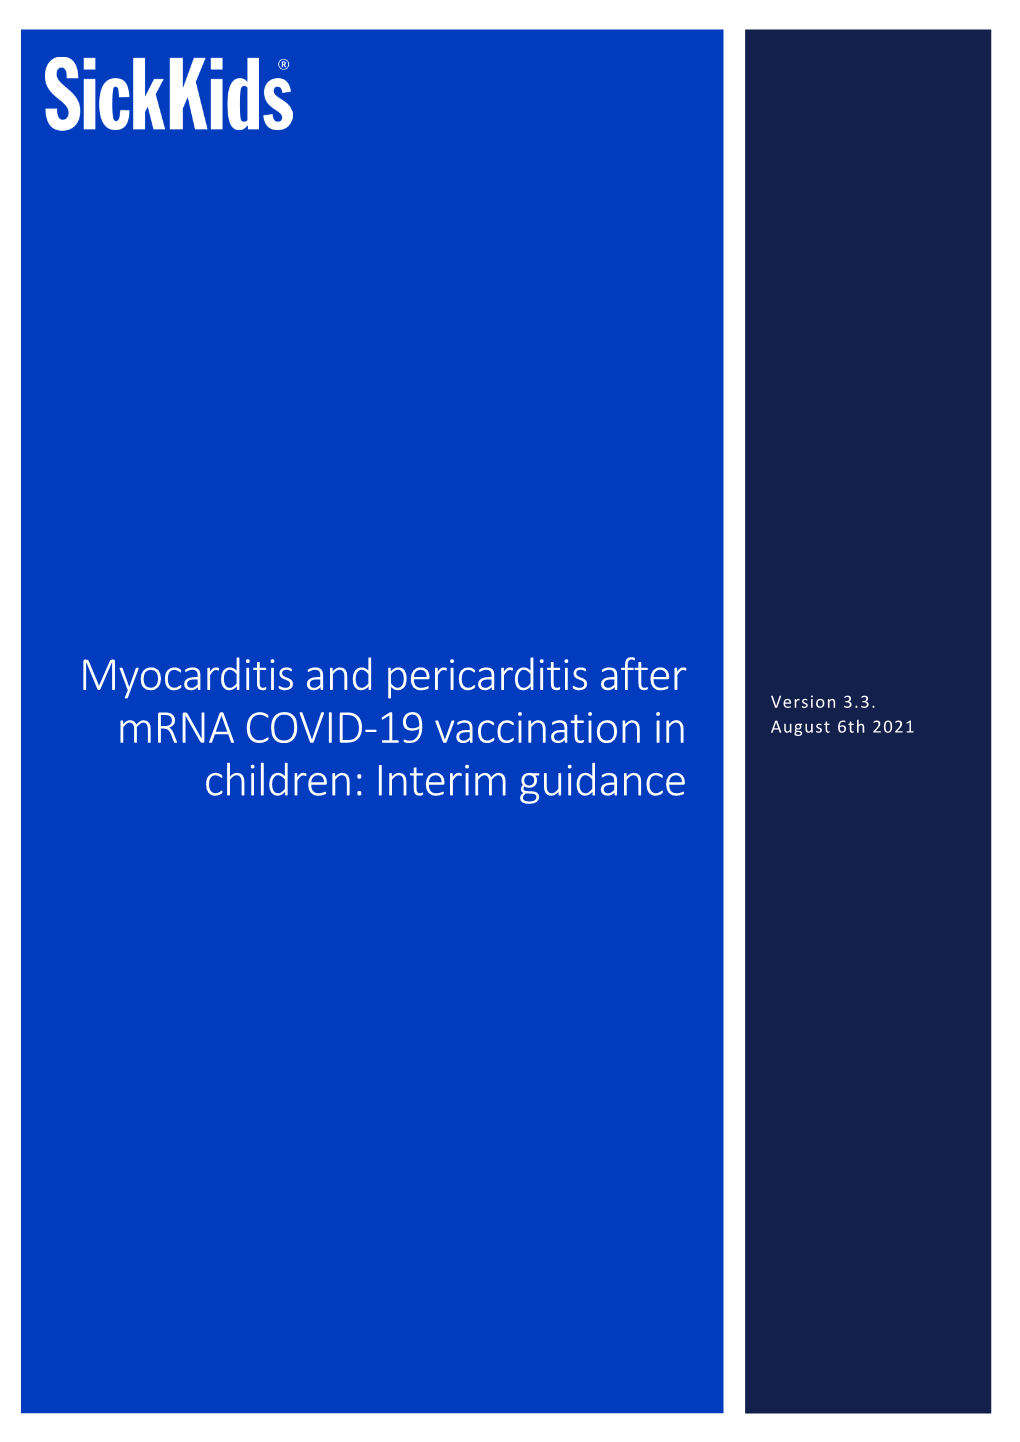 Myocarditis and Pericarditis After Mrna COVID-19 Vaccination in Children – V3.3